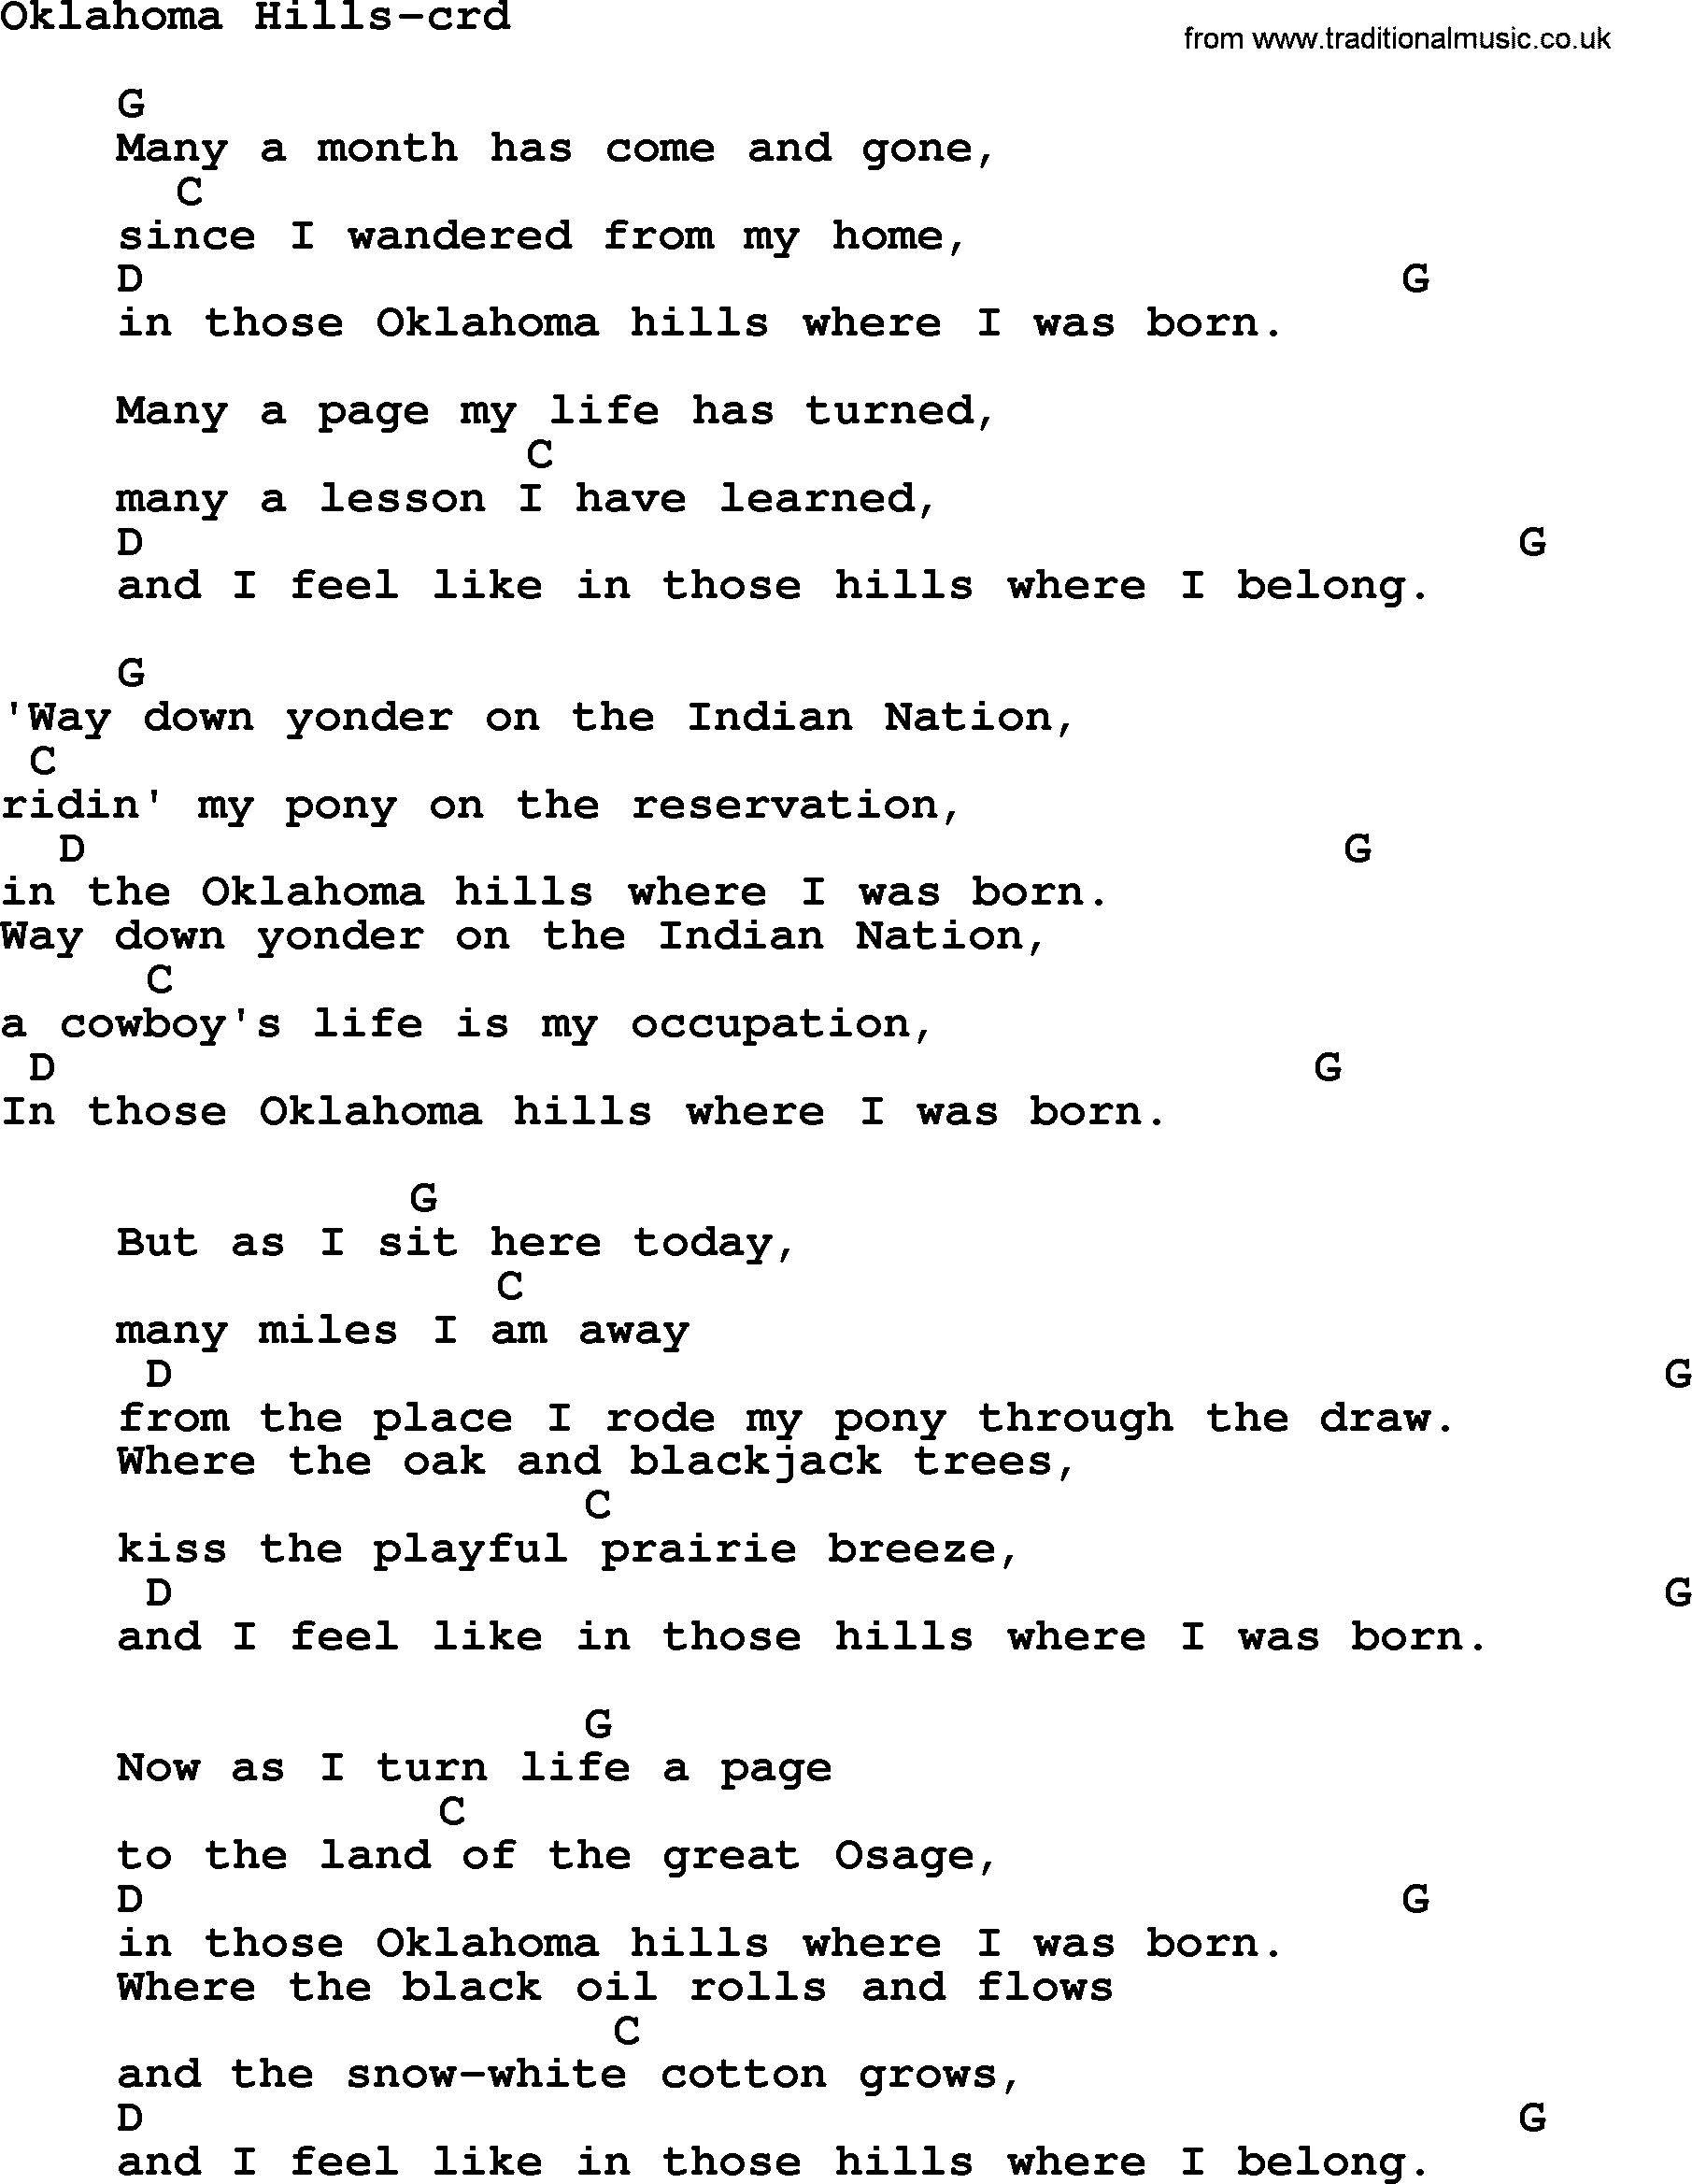 Woody Guthrie song Oklahoma Hills lyrics and chords